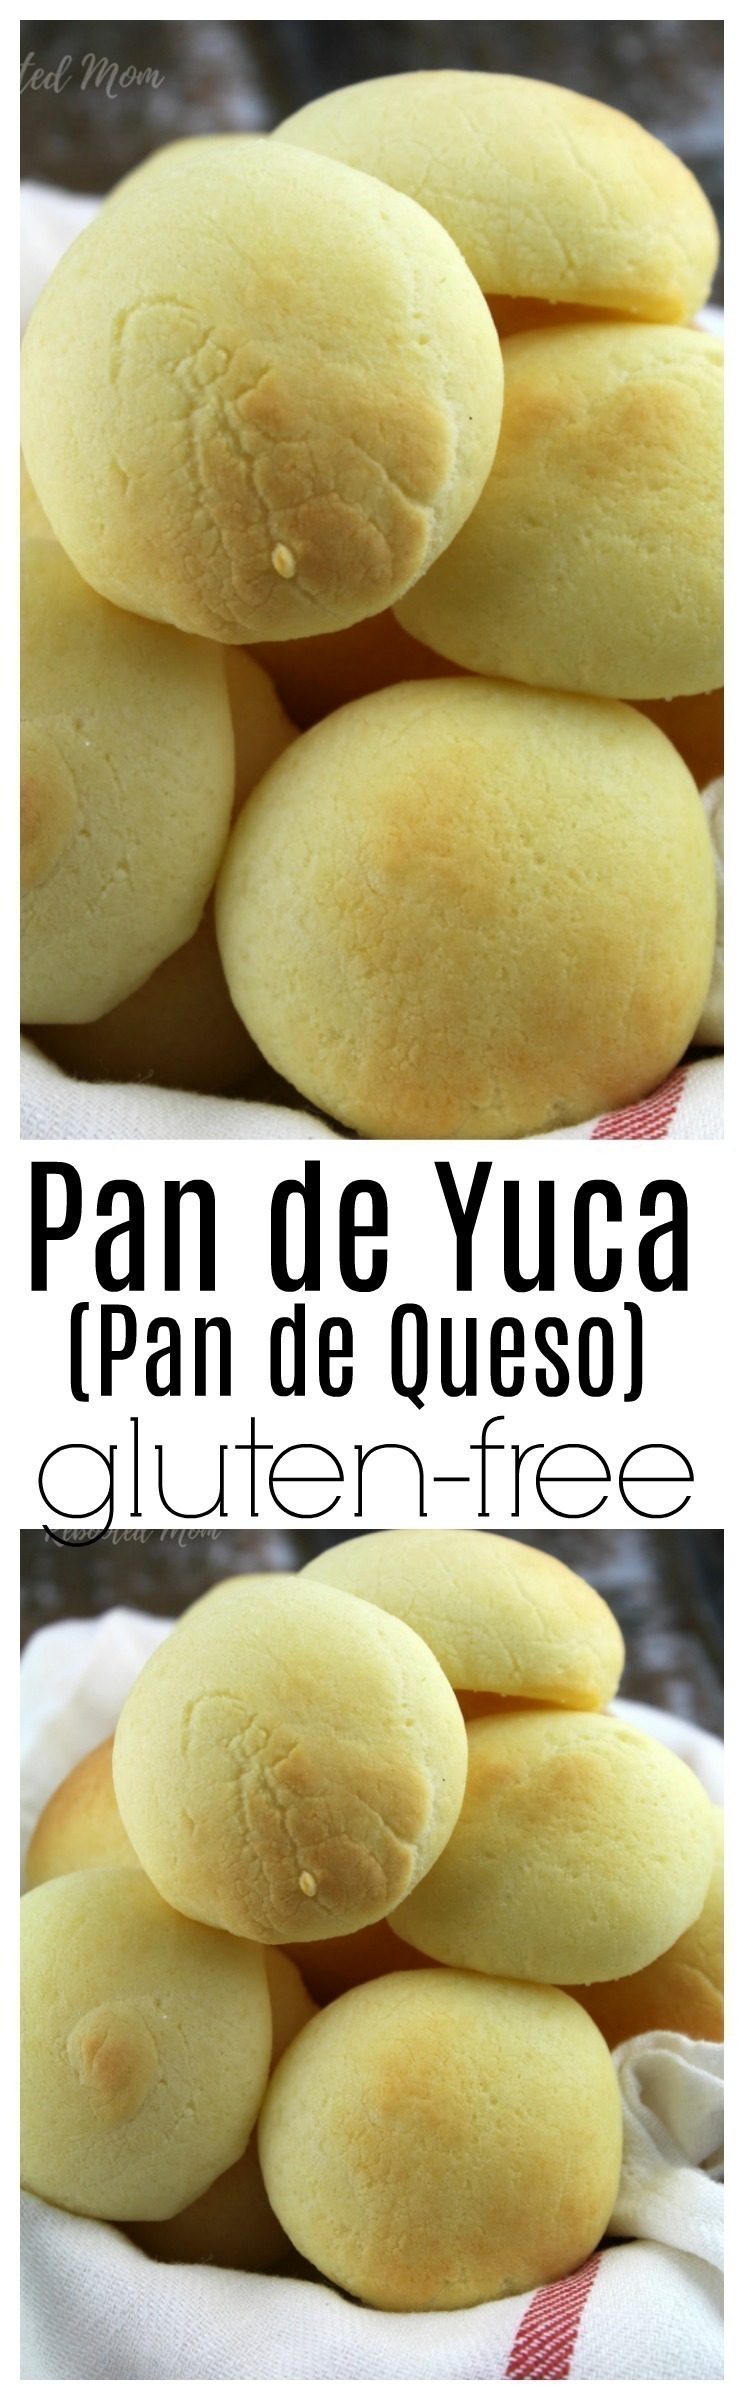 Pan de Yuca (Cassava Cheese Bread) is a delicious, gluten-free cheese bread made with yucca flour (tapioca starch) and cheese that's so easy to make! #yucca #yuccaroot #glutenfree #pandeyuca #grainfree